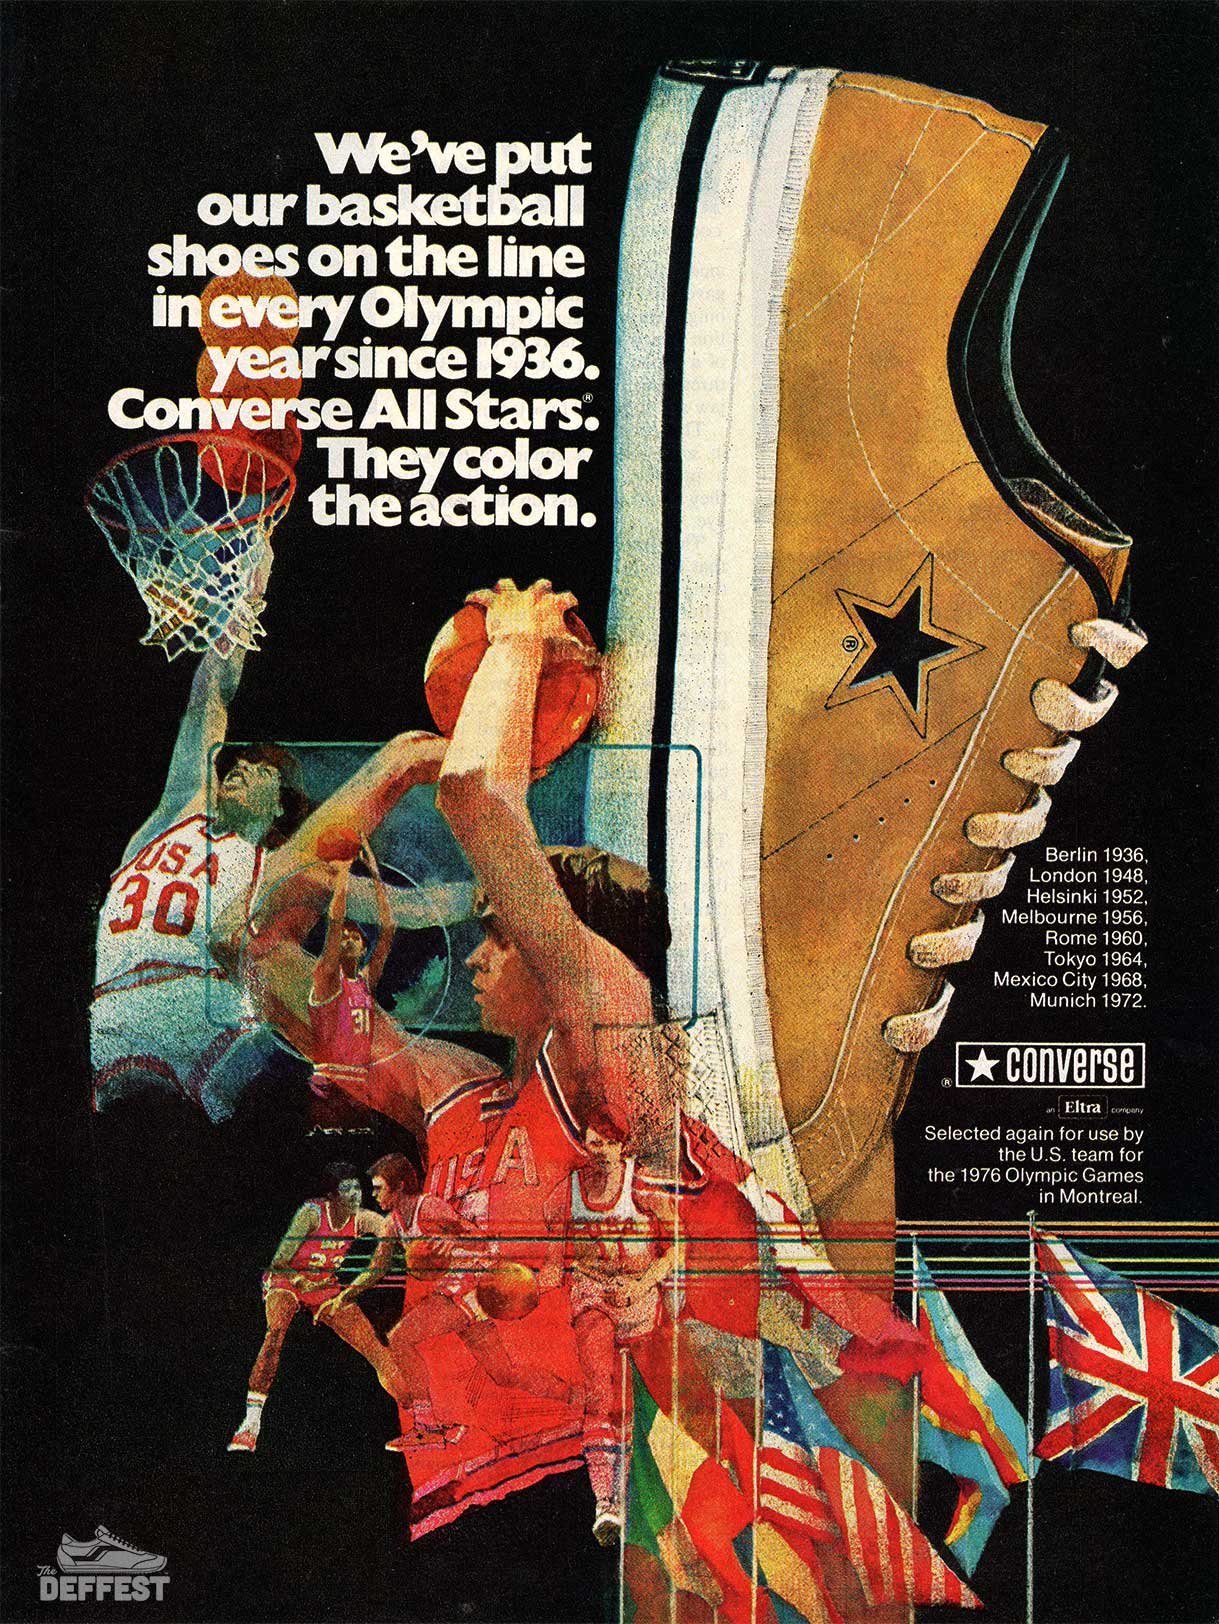 The Deffest®. A vintage and retro sneaker blog. — Hoop Stars: Converse  All-Stars 1975 Basketball Shoes Vintage Sneakers Print Ad